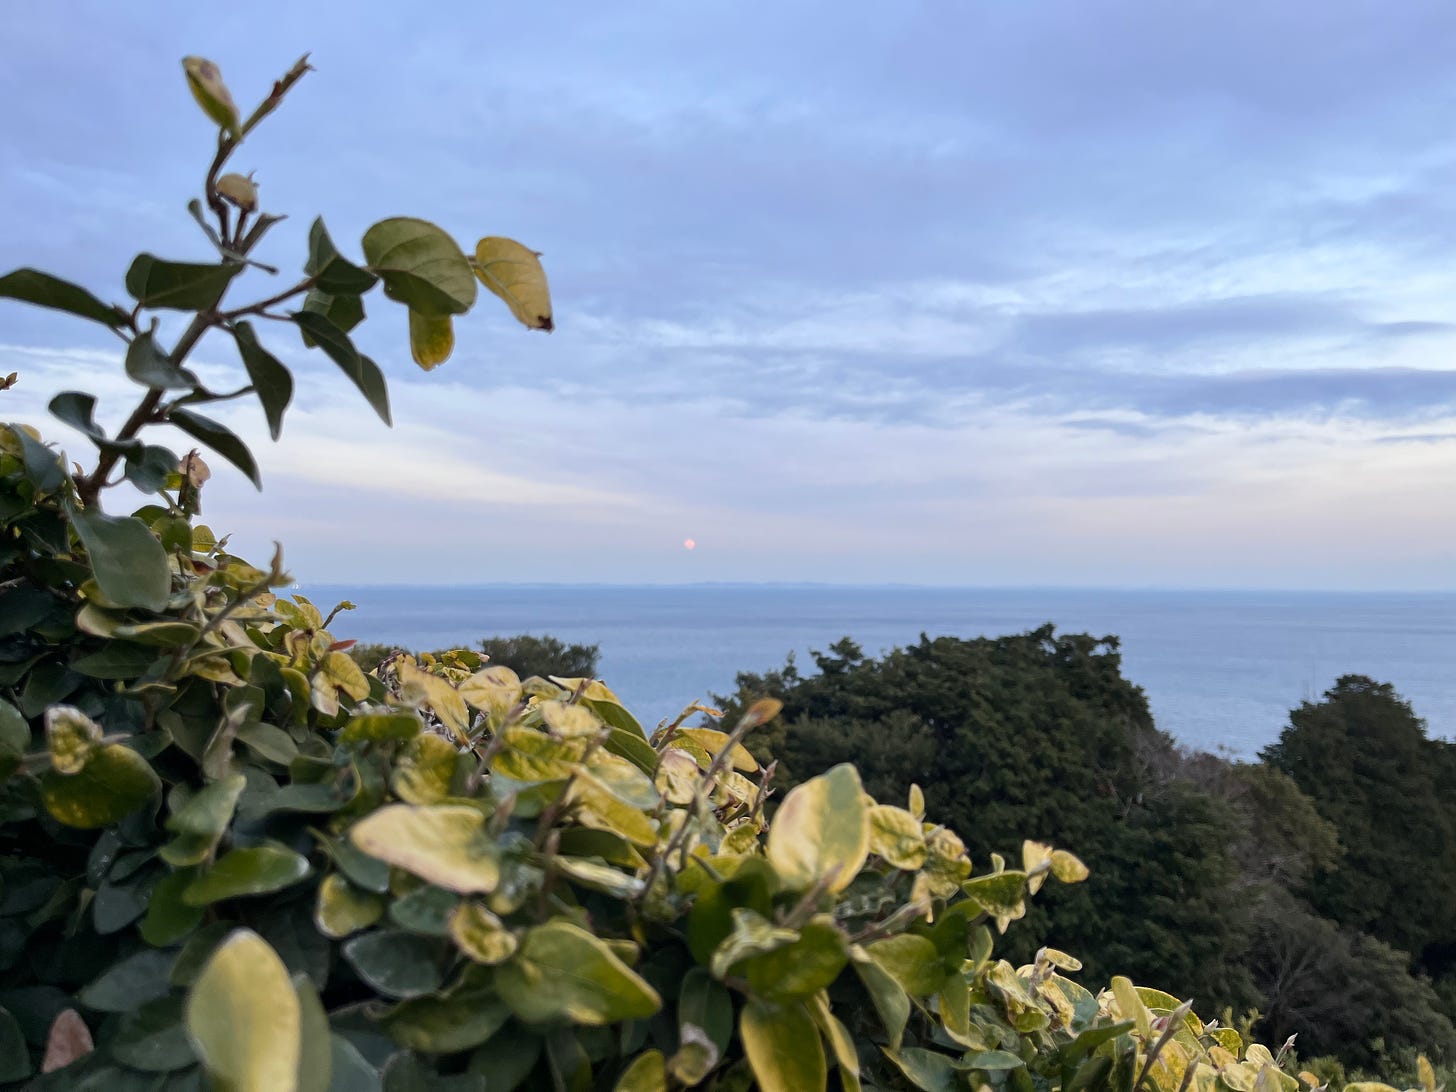 the full moon in the distance over the sea with greenery in the foreground